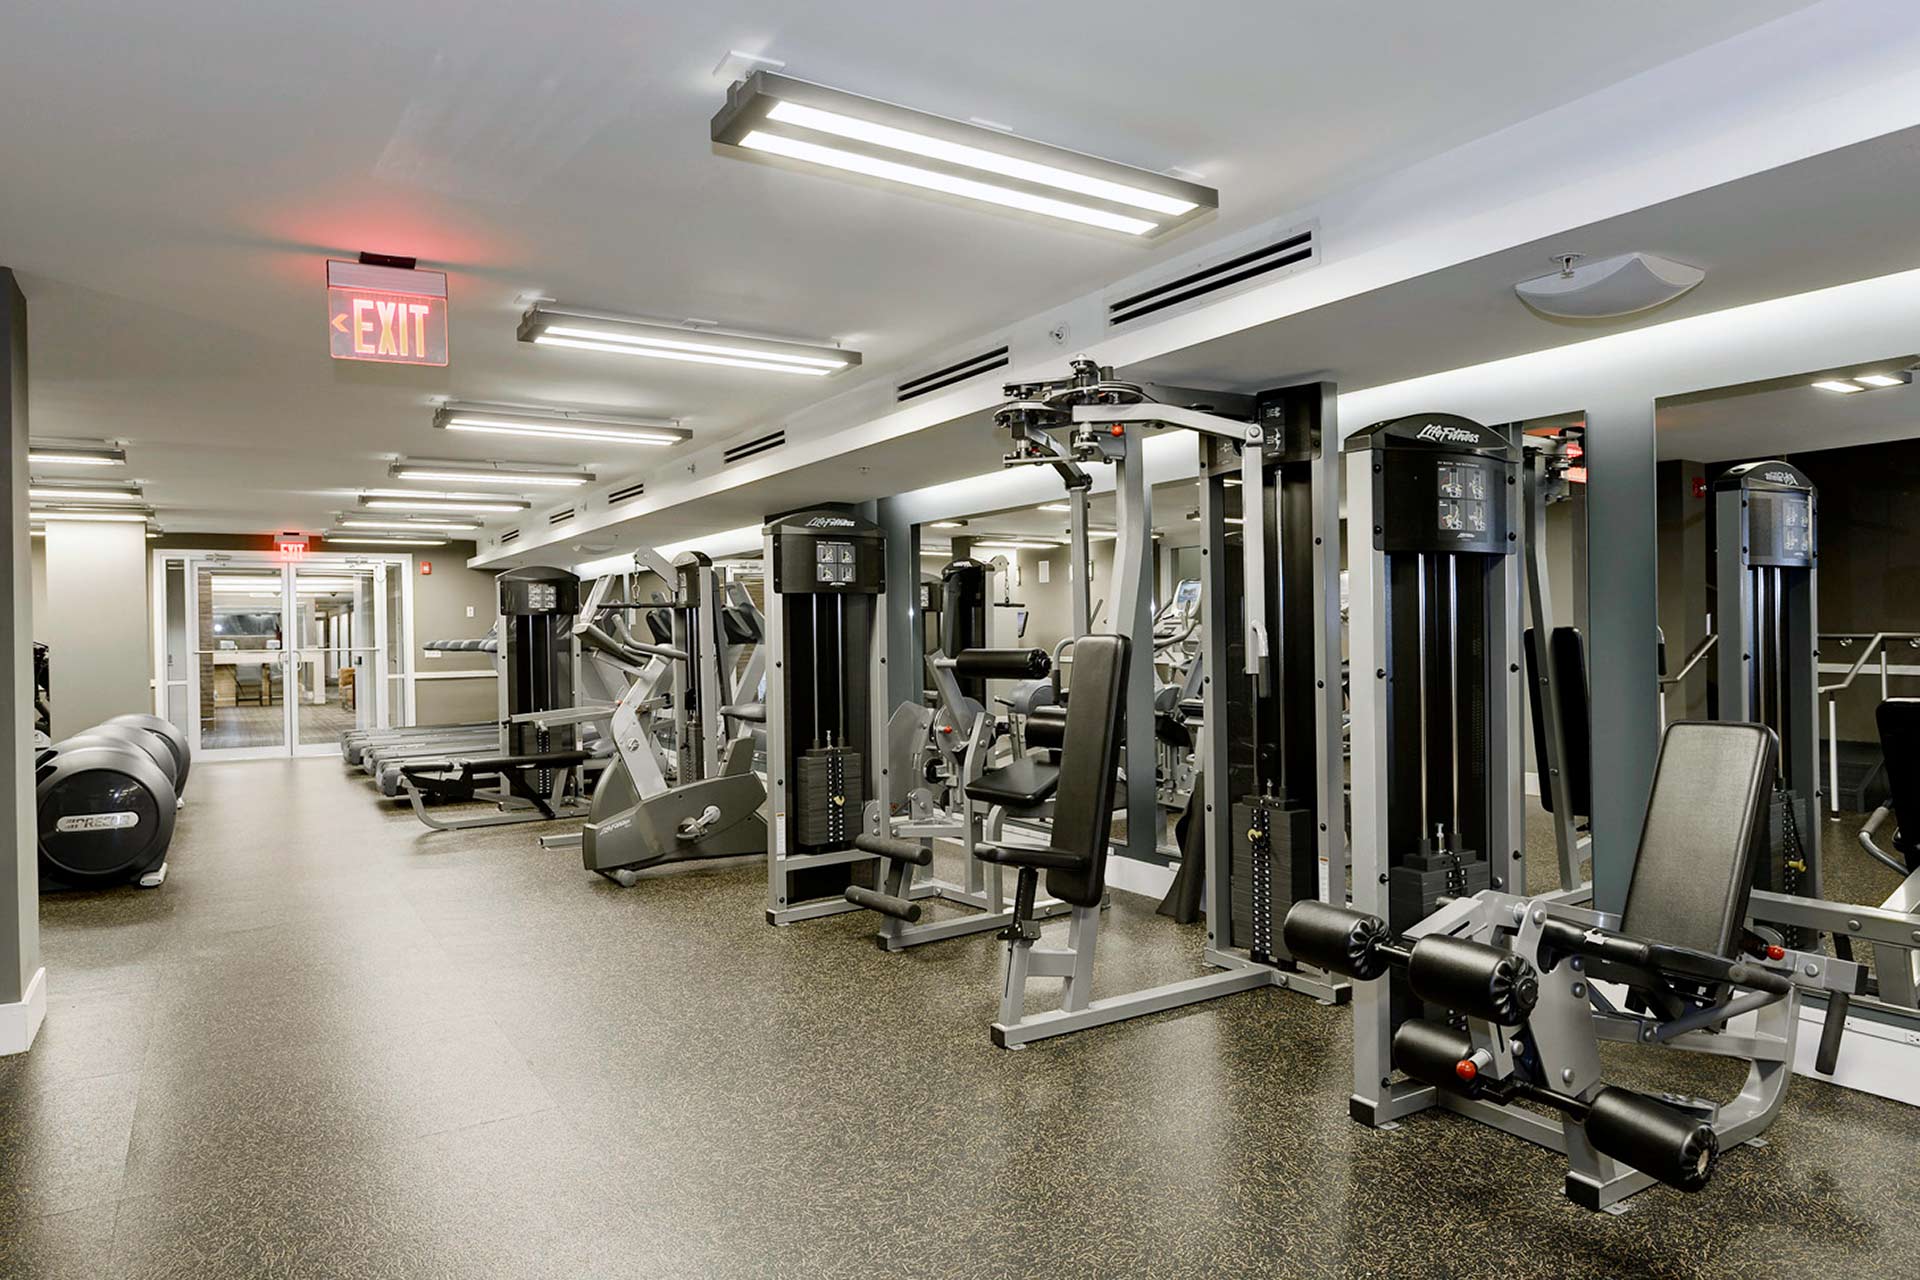 Large fitness room with impact absorbent flooring and strength training equipment along the right, mirrored wall